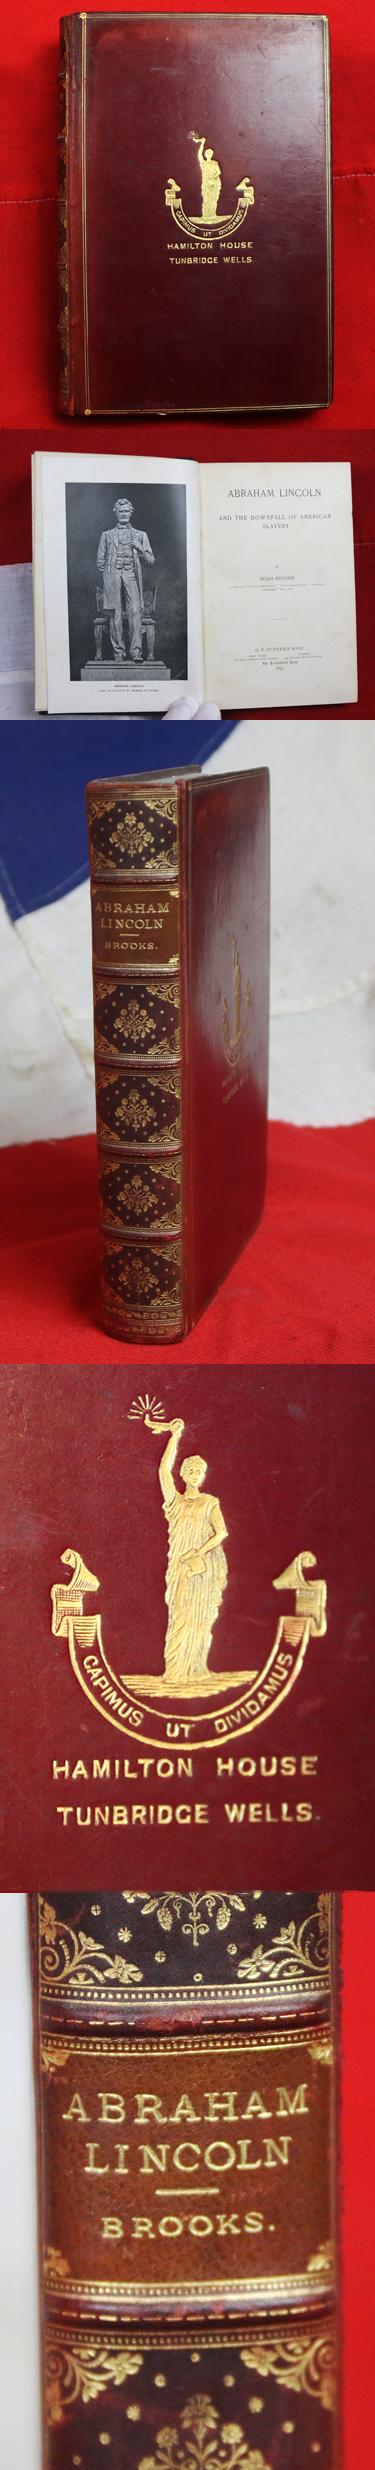 A Beautifully Bound Leather Book, Abraham Lincoln and The Downfall of American Slavery {Heroes of the Nations} by Noah Brooks 1894